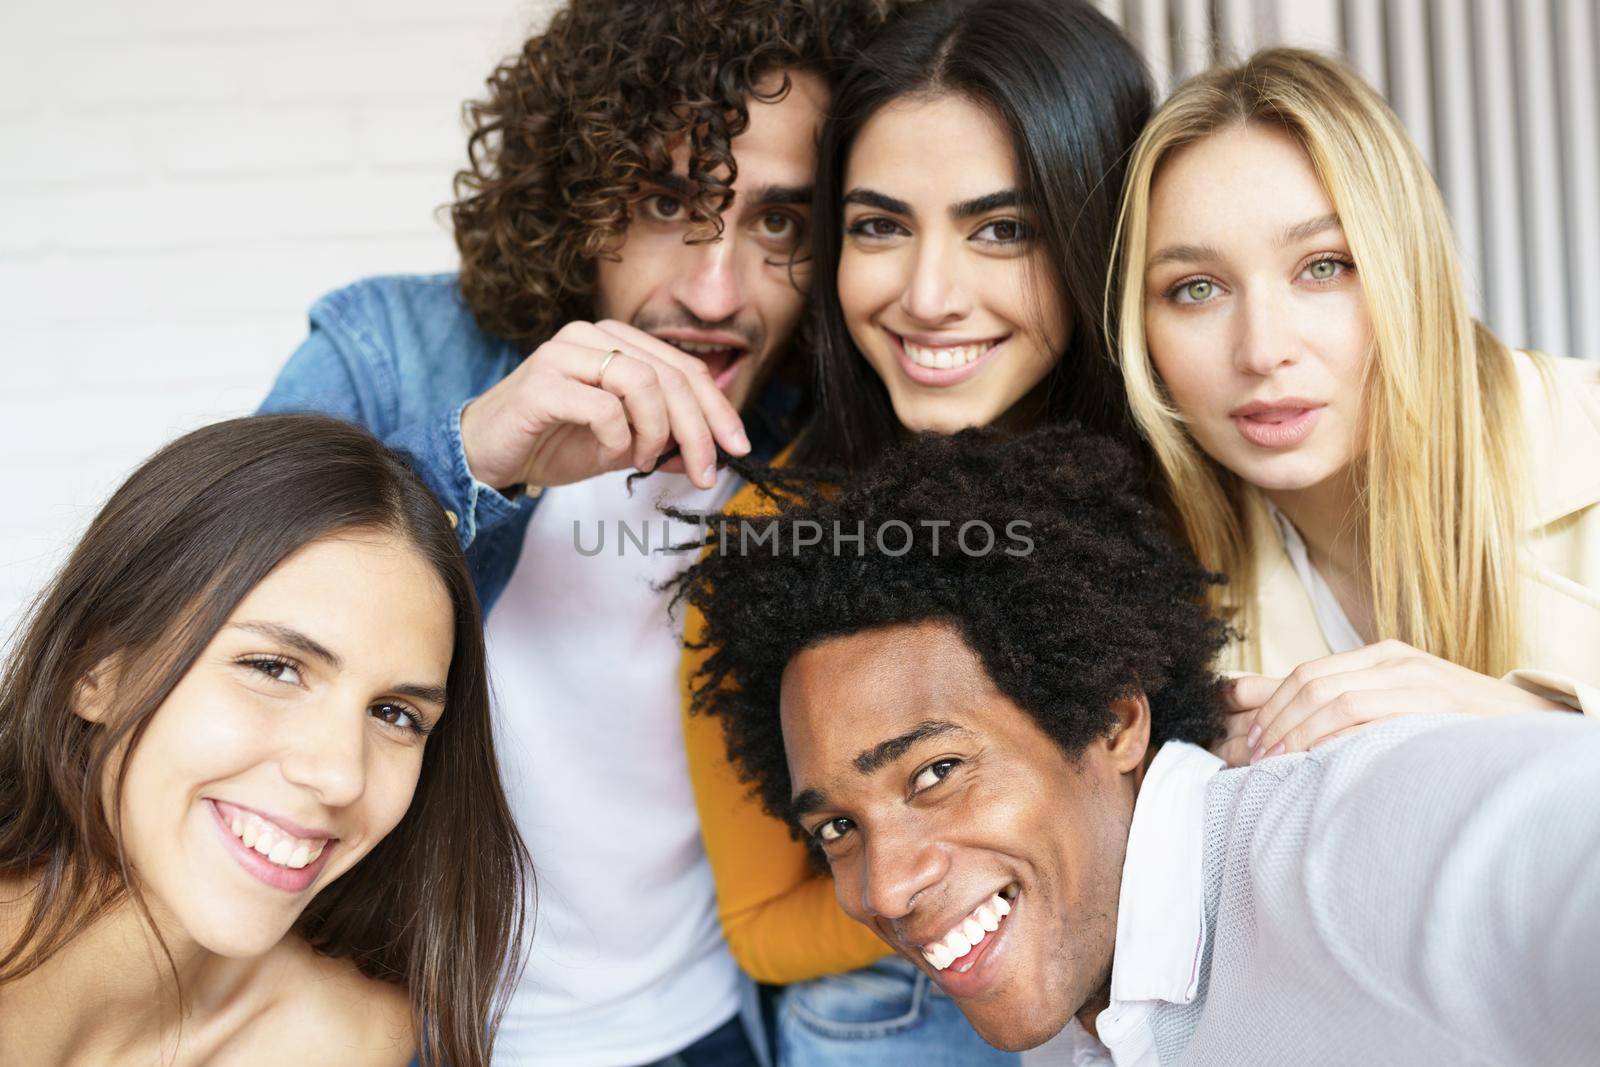 Multi-ethnic group of friends taking a selfie together while having fun in the street. Black man with afro hair in the foreground.